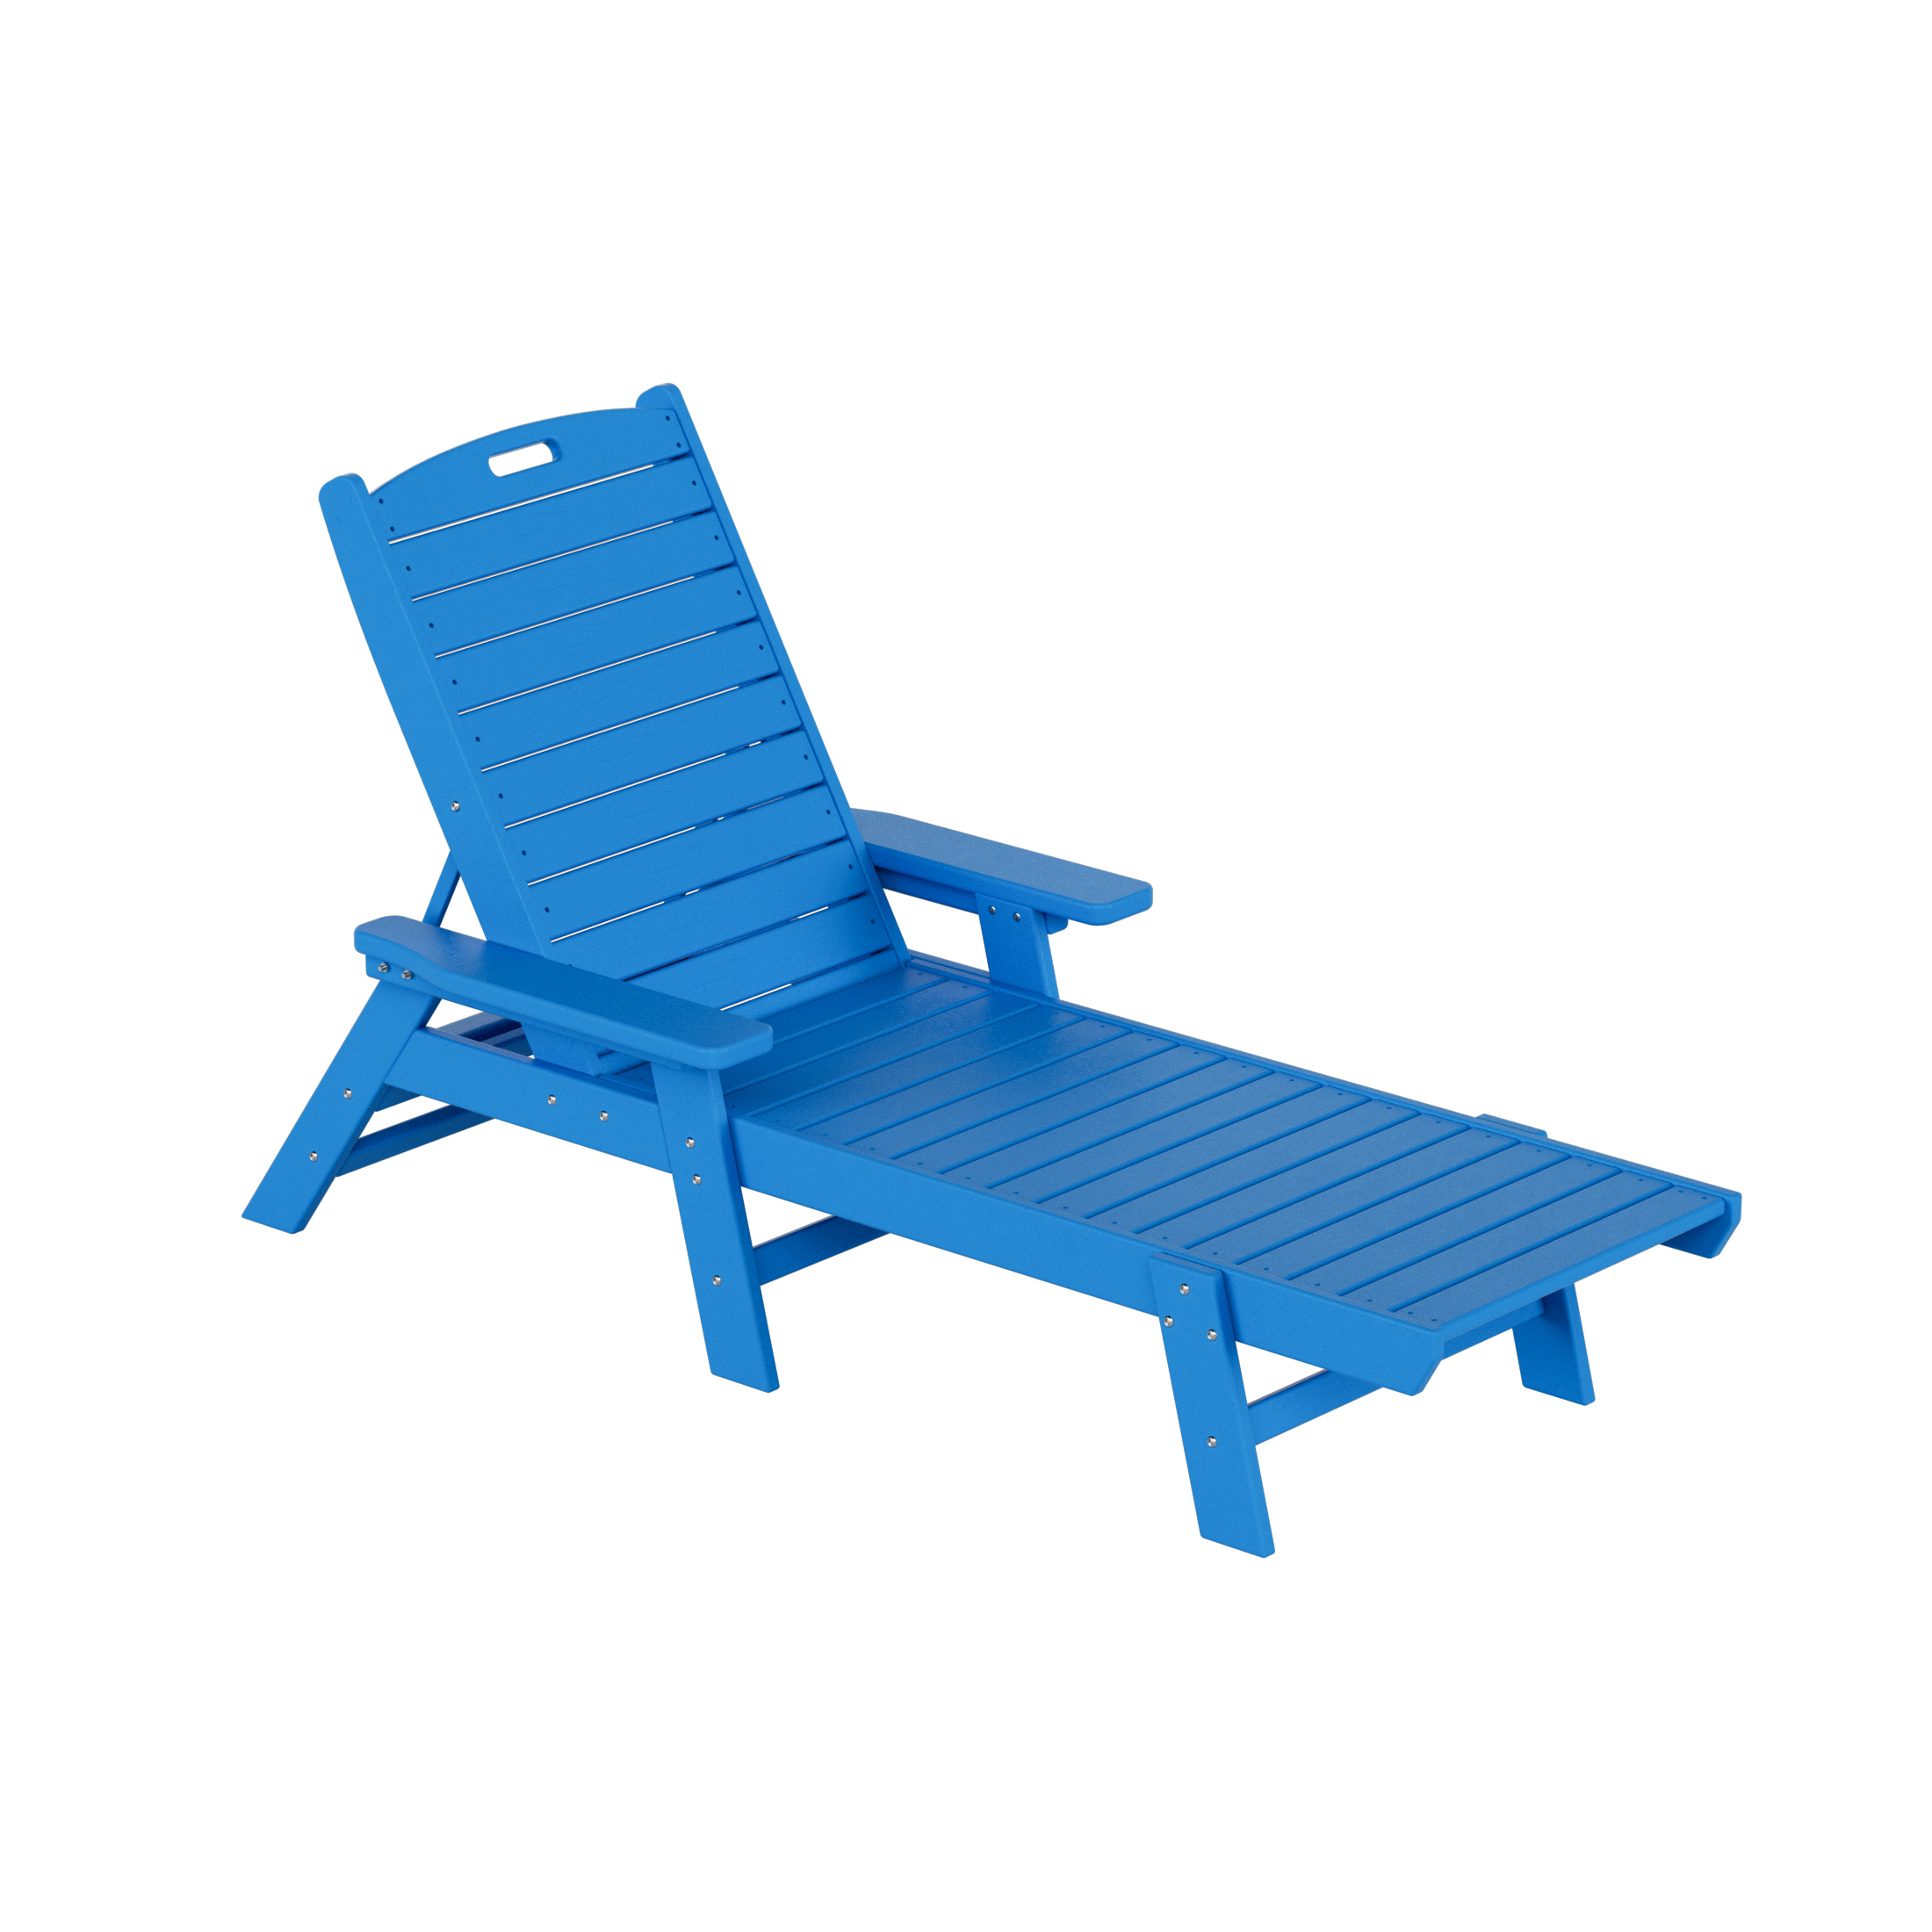 Bayport Outdoor 3PC HDPE Plastic Reclining Chaise Lounge/Table Set Pacific Blue - image 3 of 13